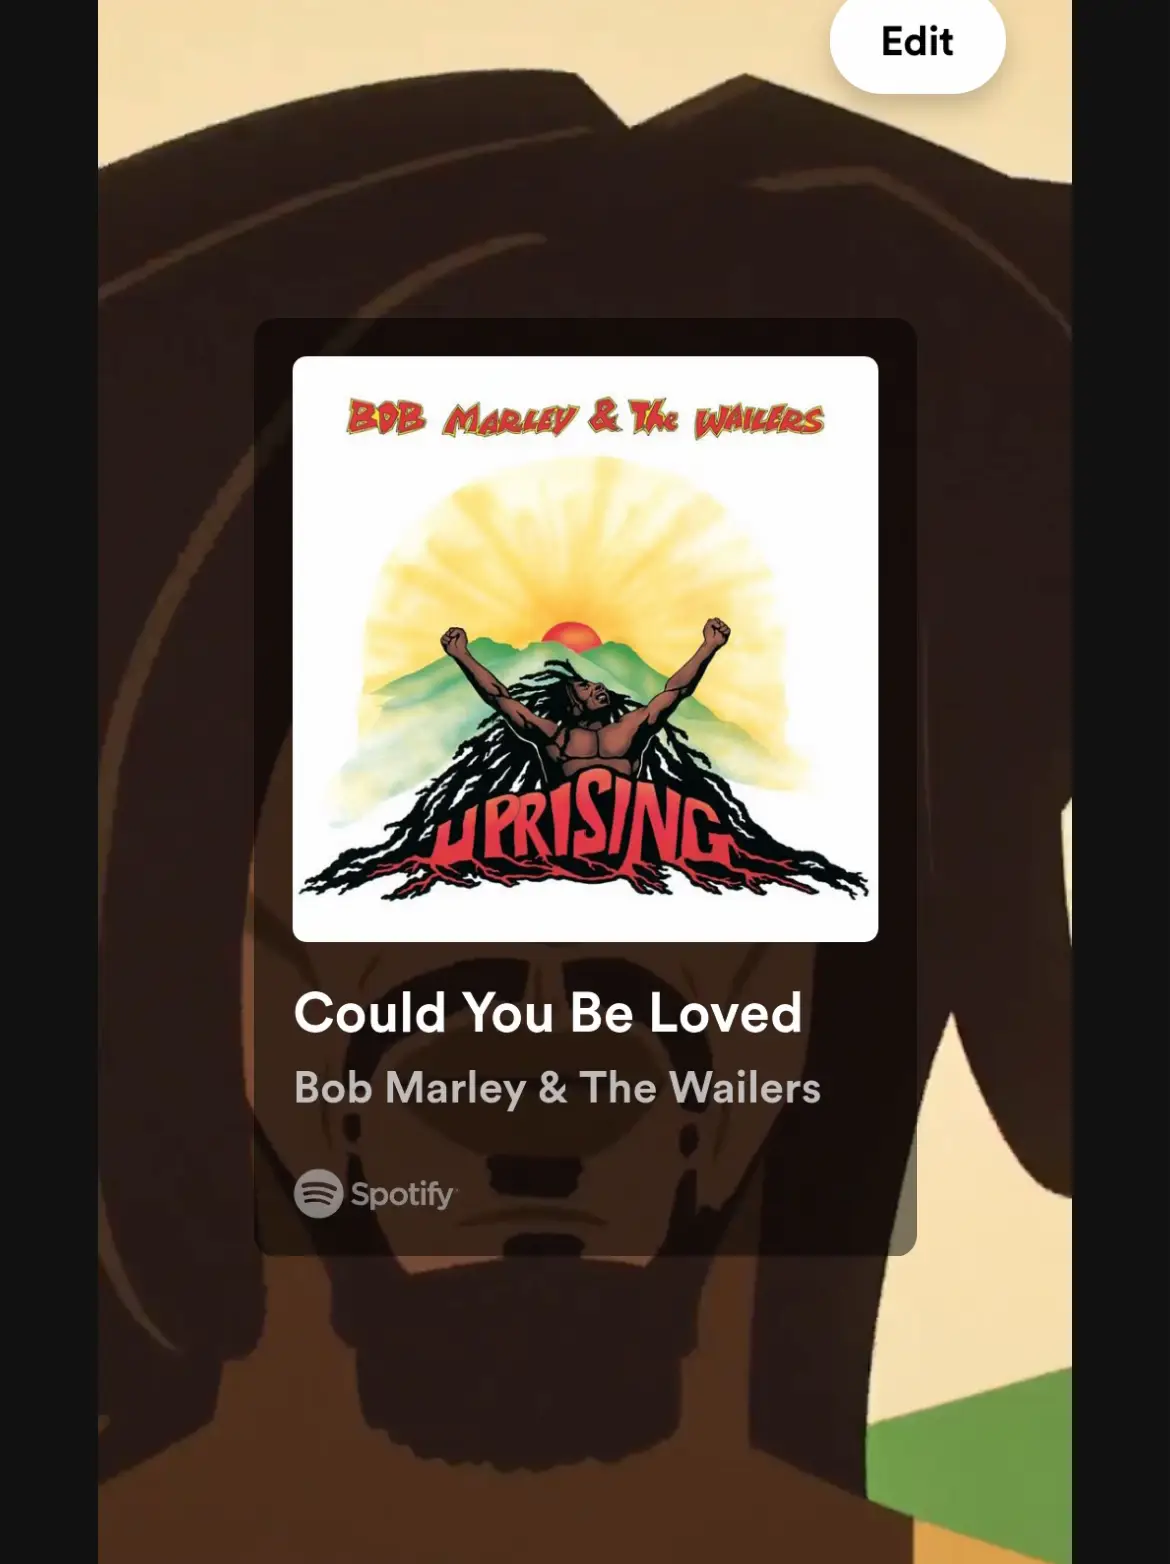  A Spotify playlist of Bob Marley and the Wailers.